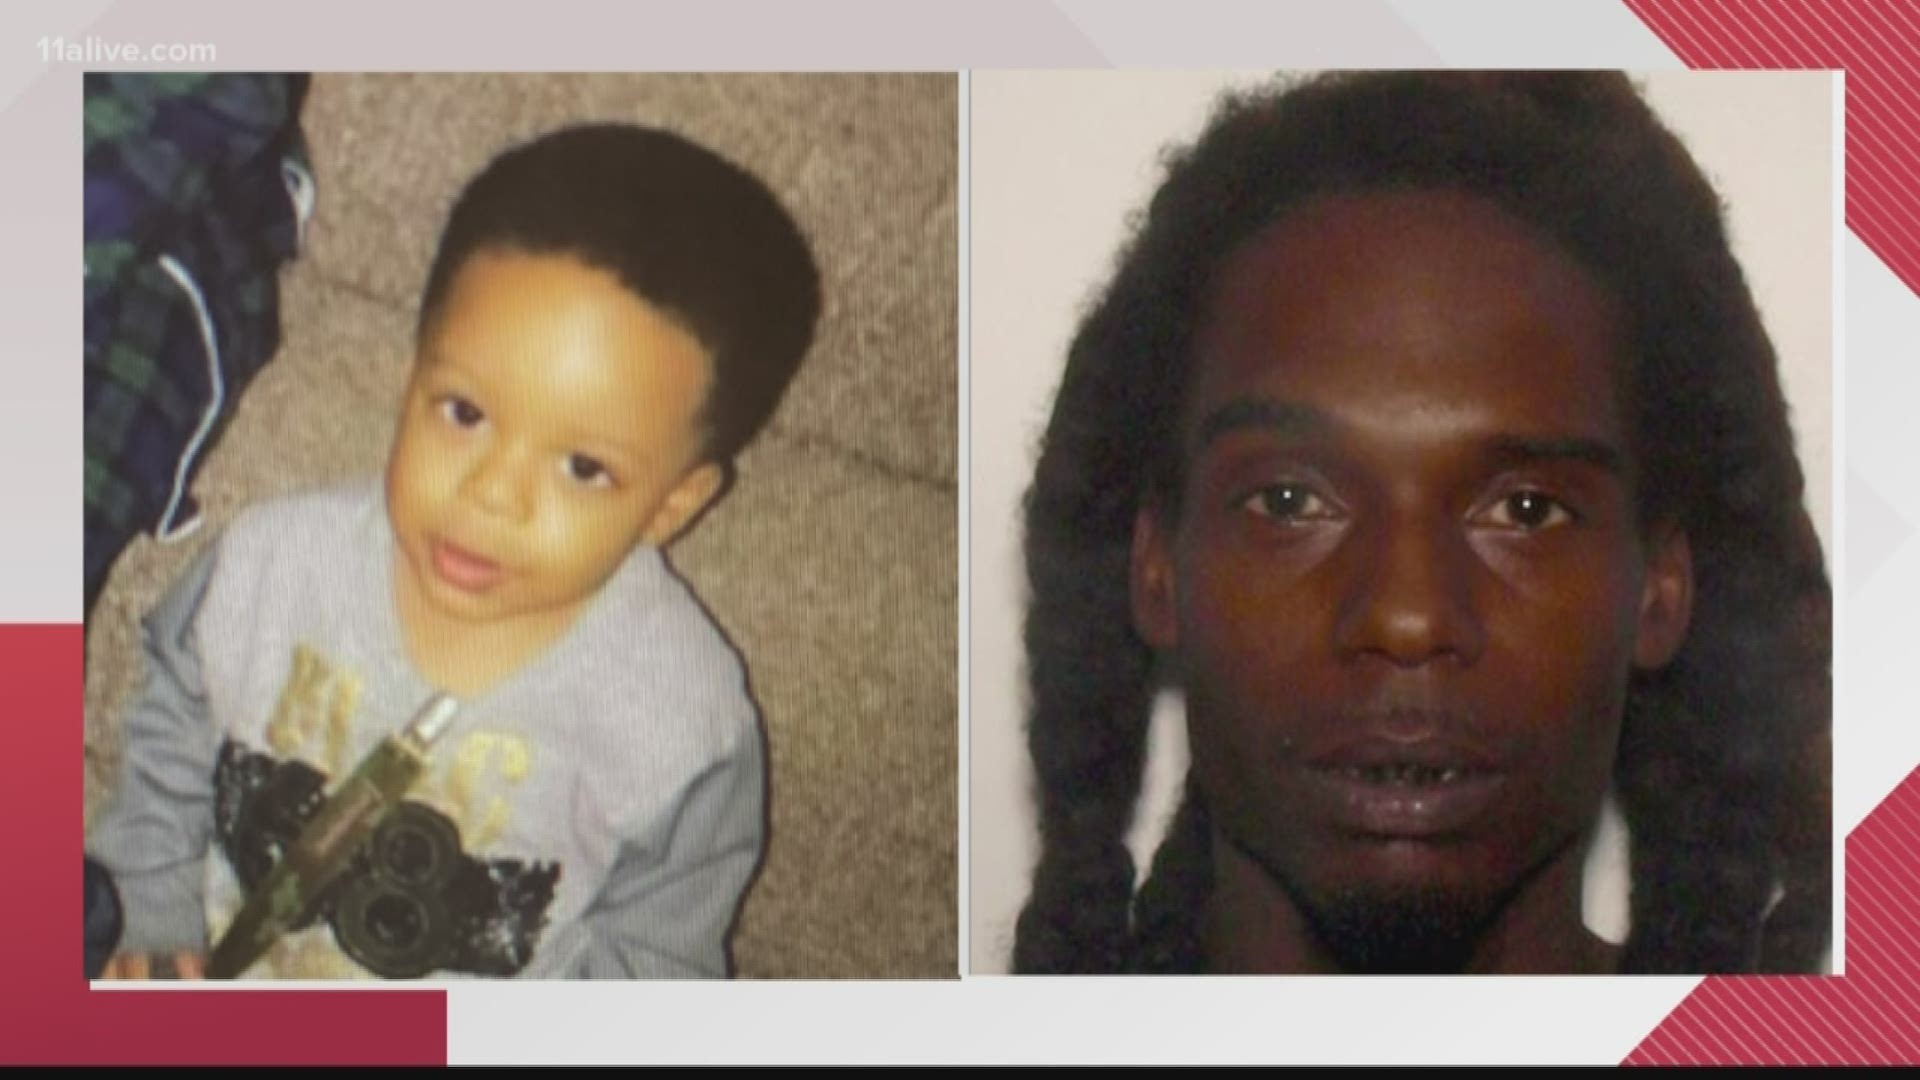 Police are searching for 2-year-old Sean McGay and his alleged abductor Sidney Hepburn.